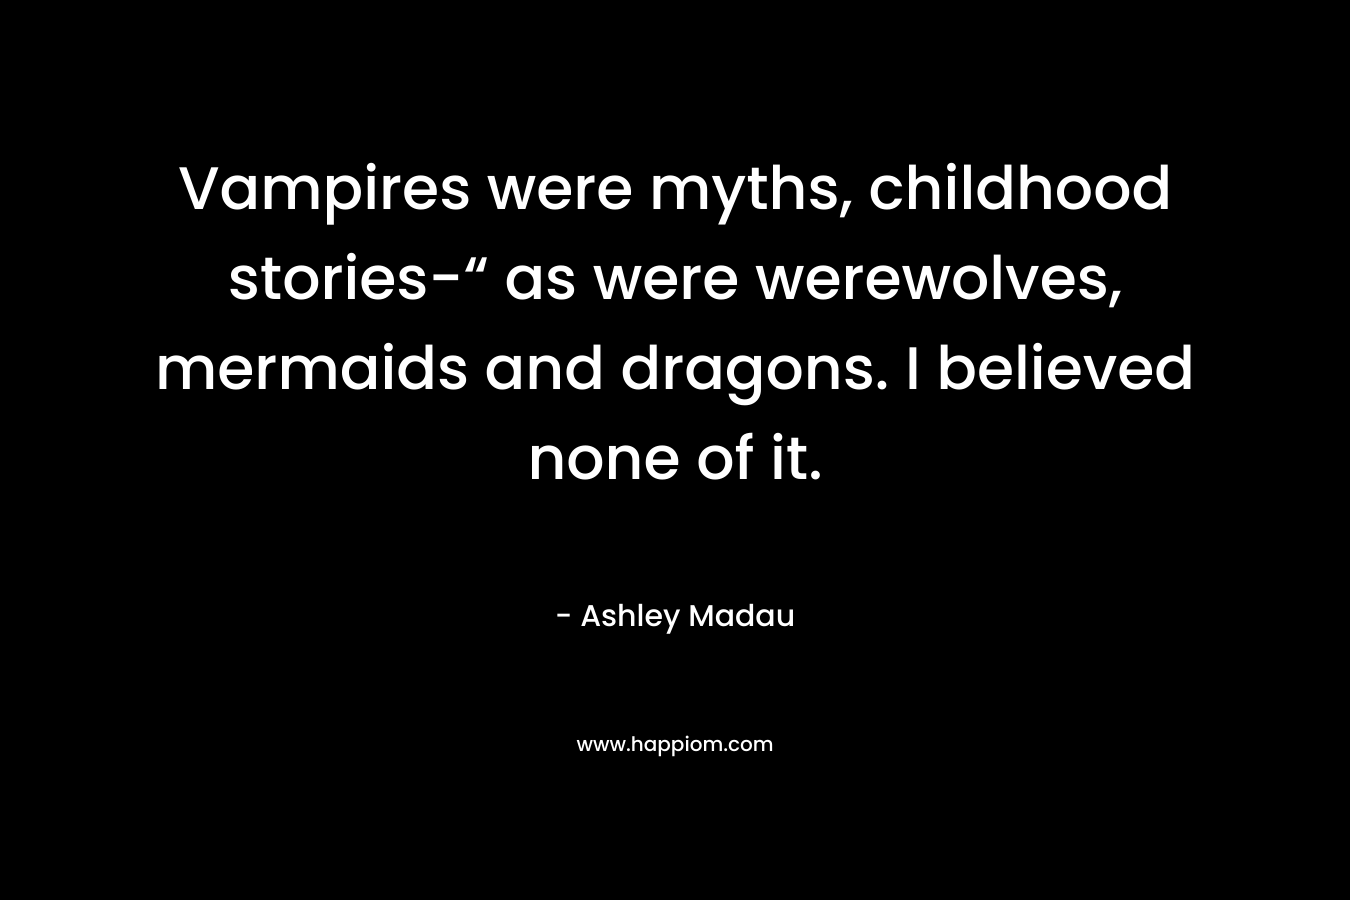 Vampires were myths, childhood stories-“ as were werewolves, mermaids and dragons. I believed none of it. – Ashley Madau